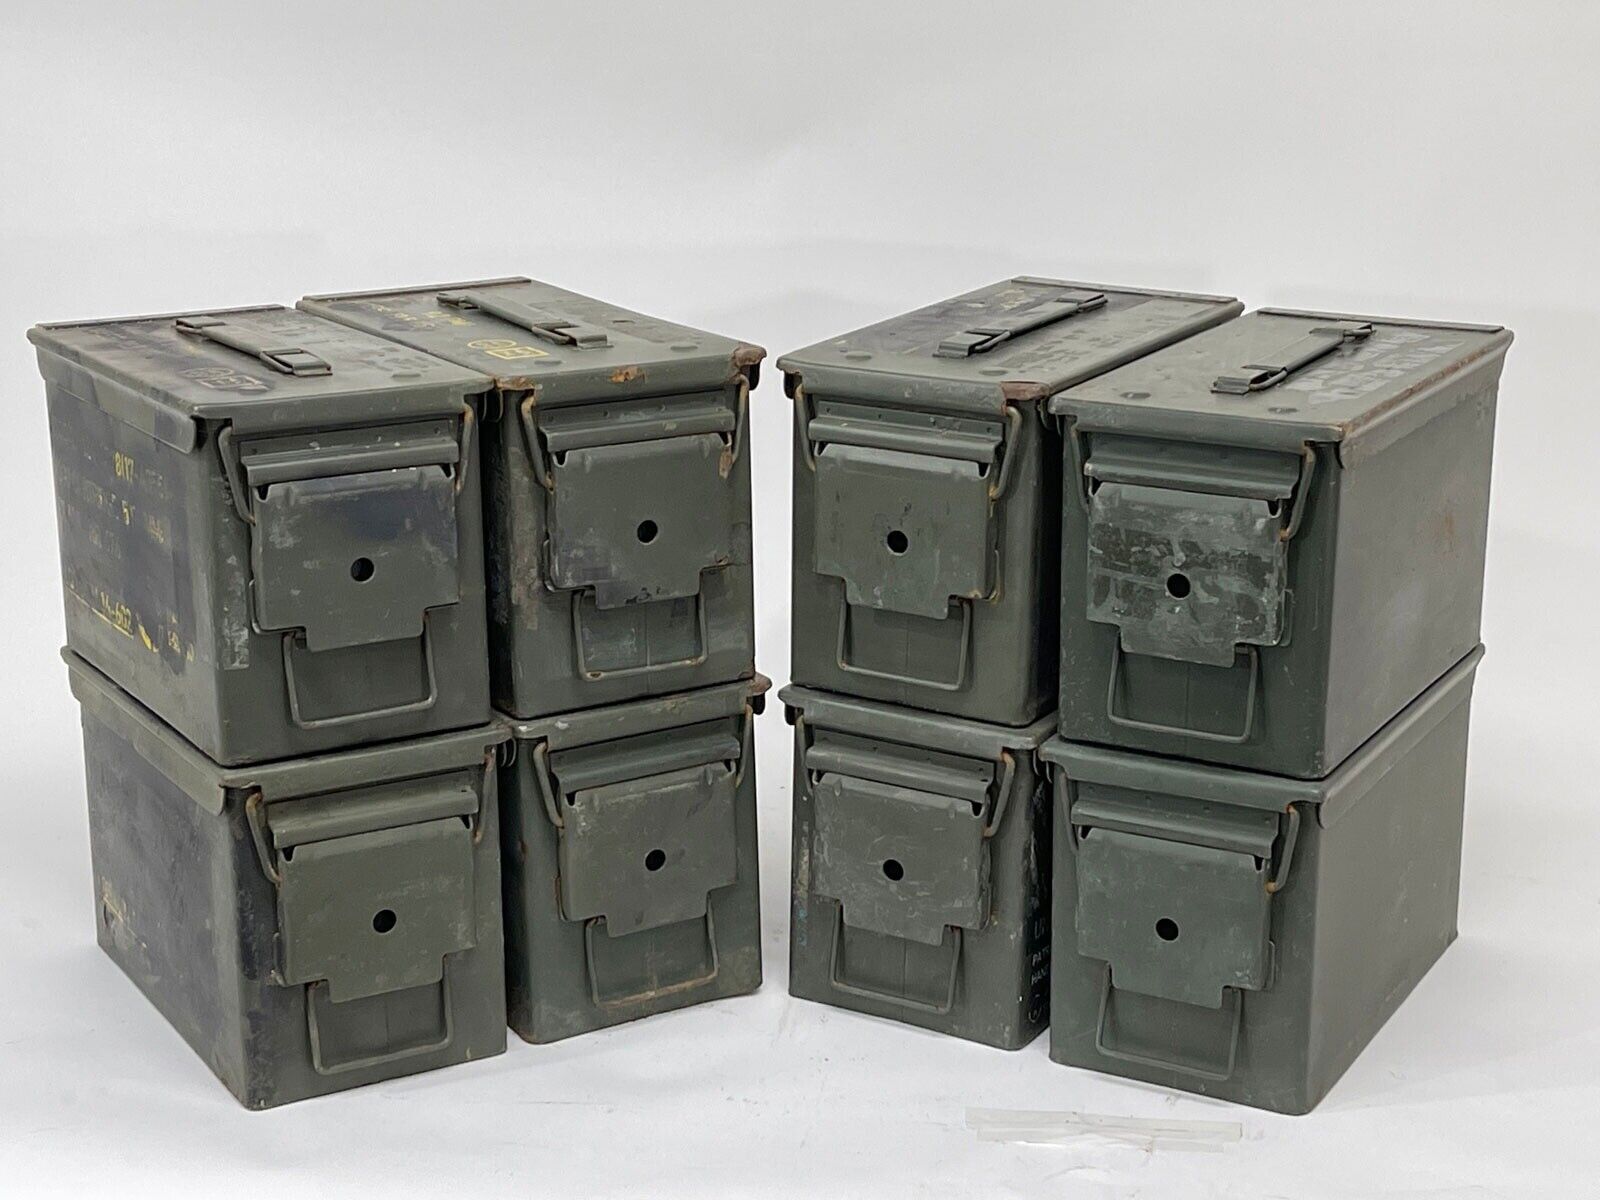 50 Cal Metal Ammo Can – Military Steel Box Ammo Storage - Used - 8 Pack